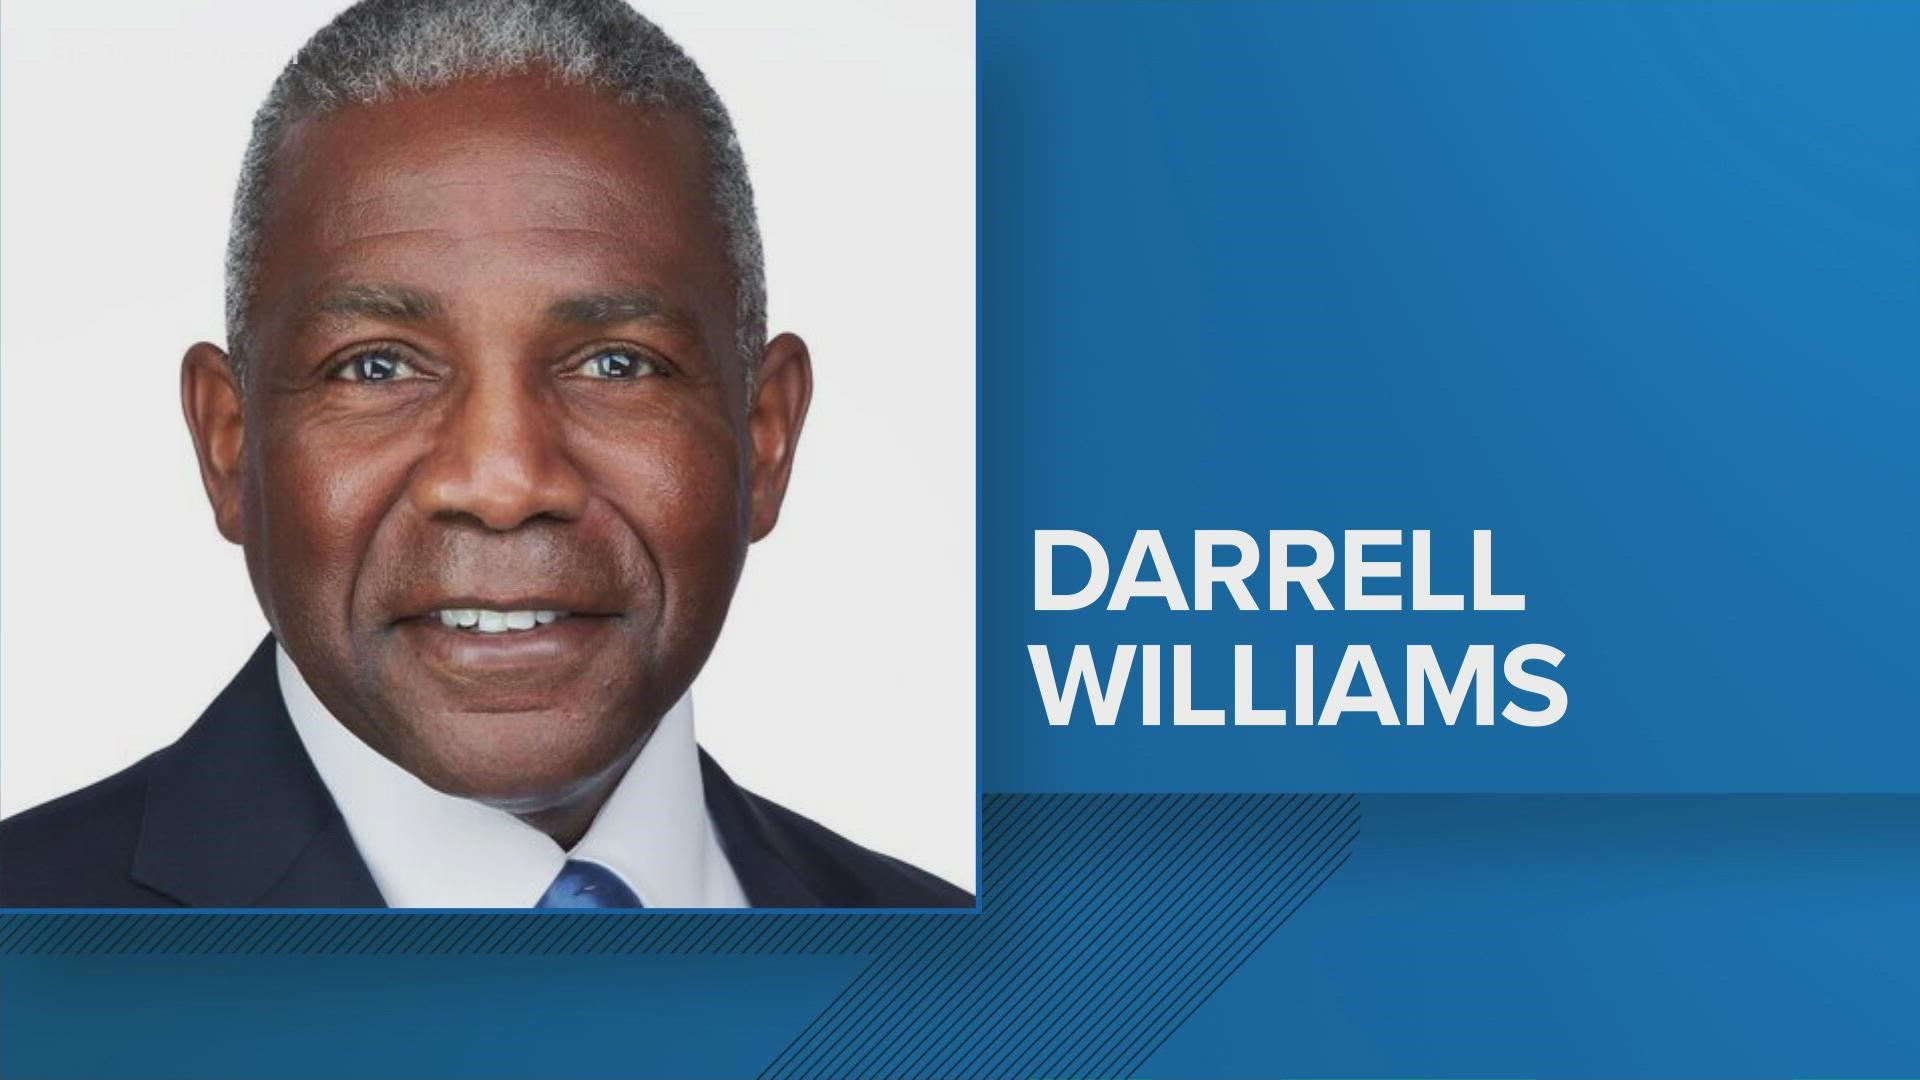 Darrell K. Williams was selected by The Board of Trustees from a pool of almost 300 applicants.